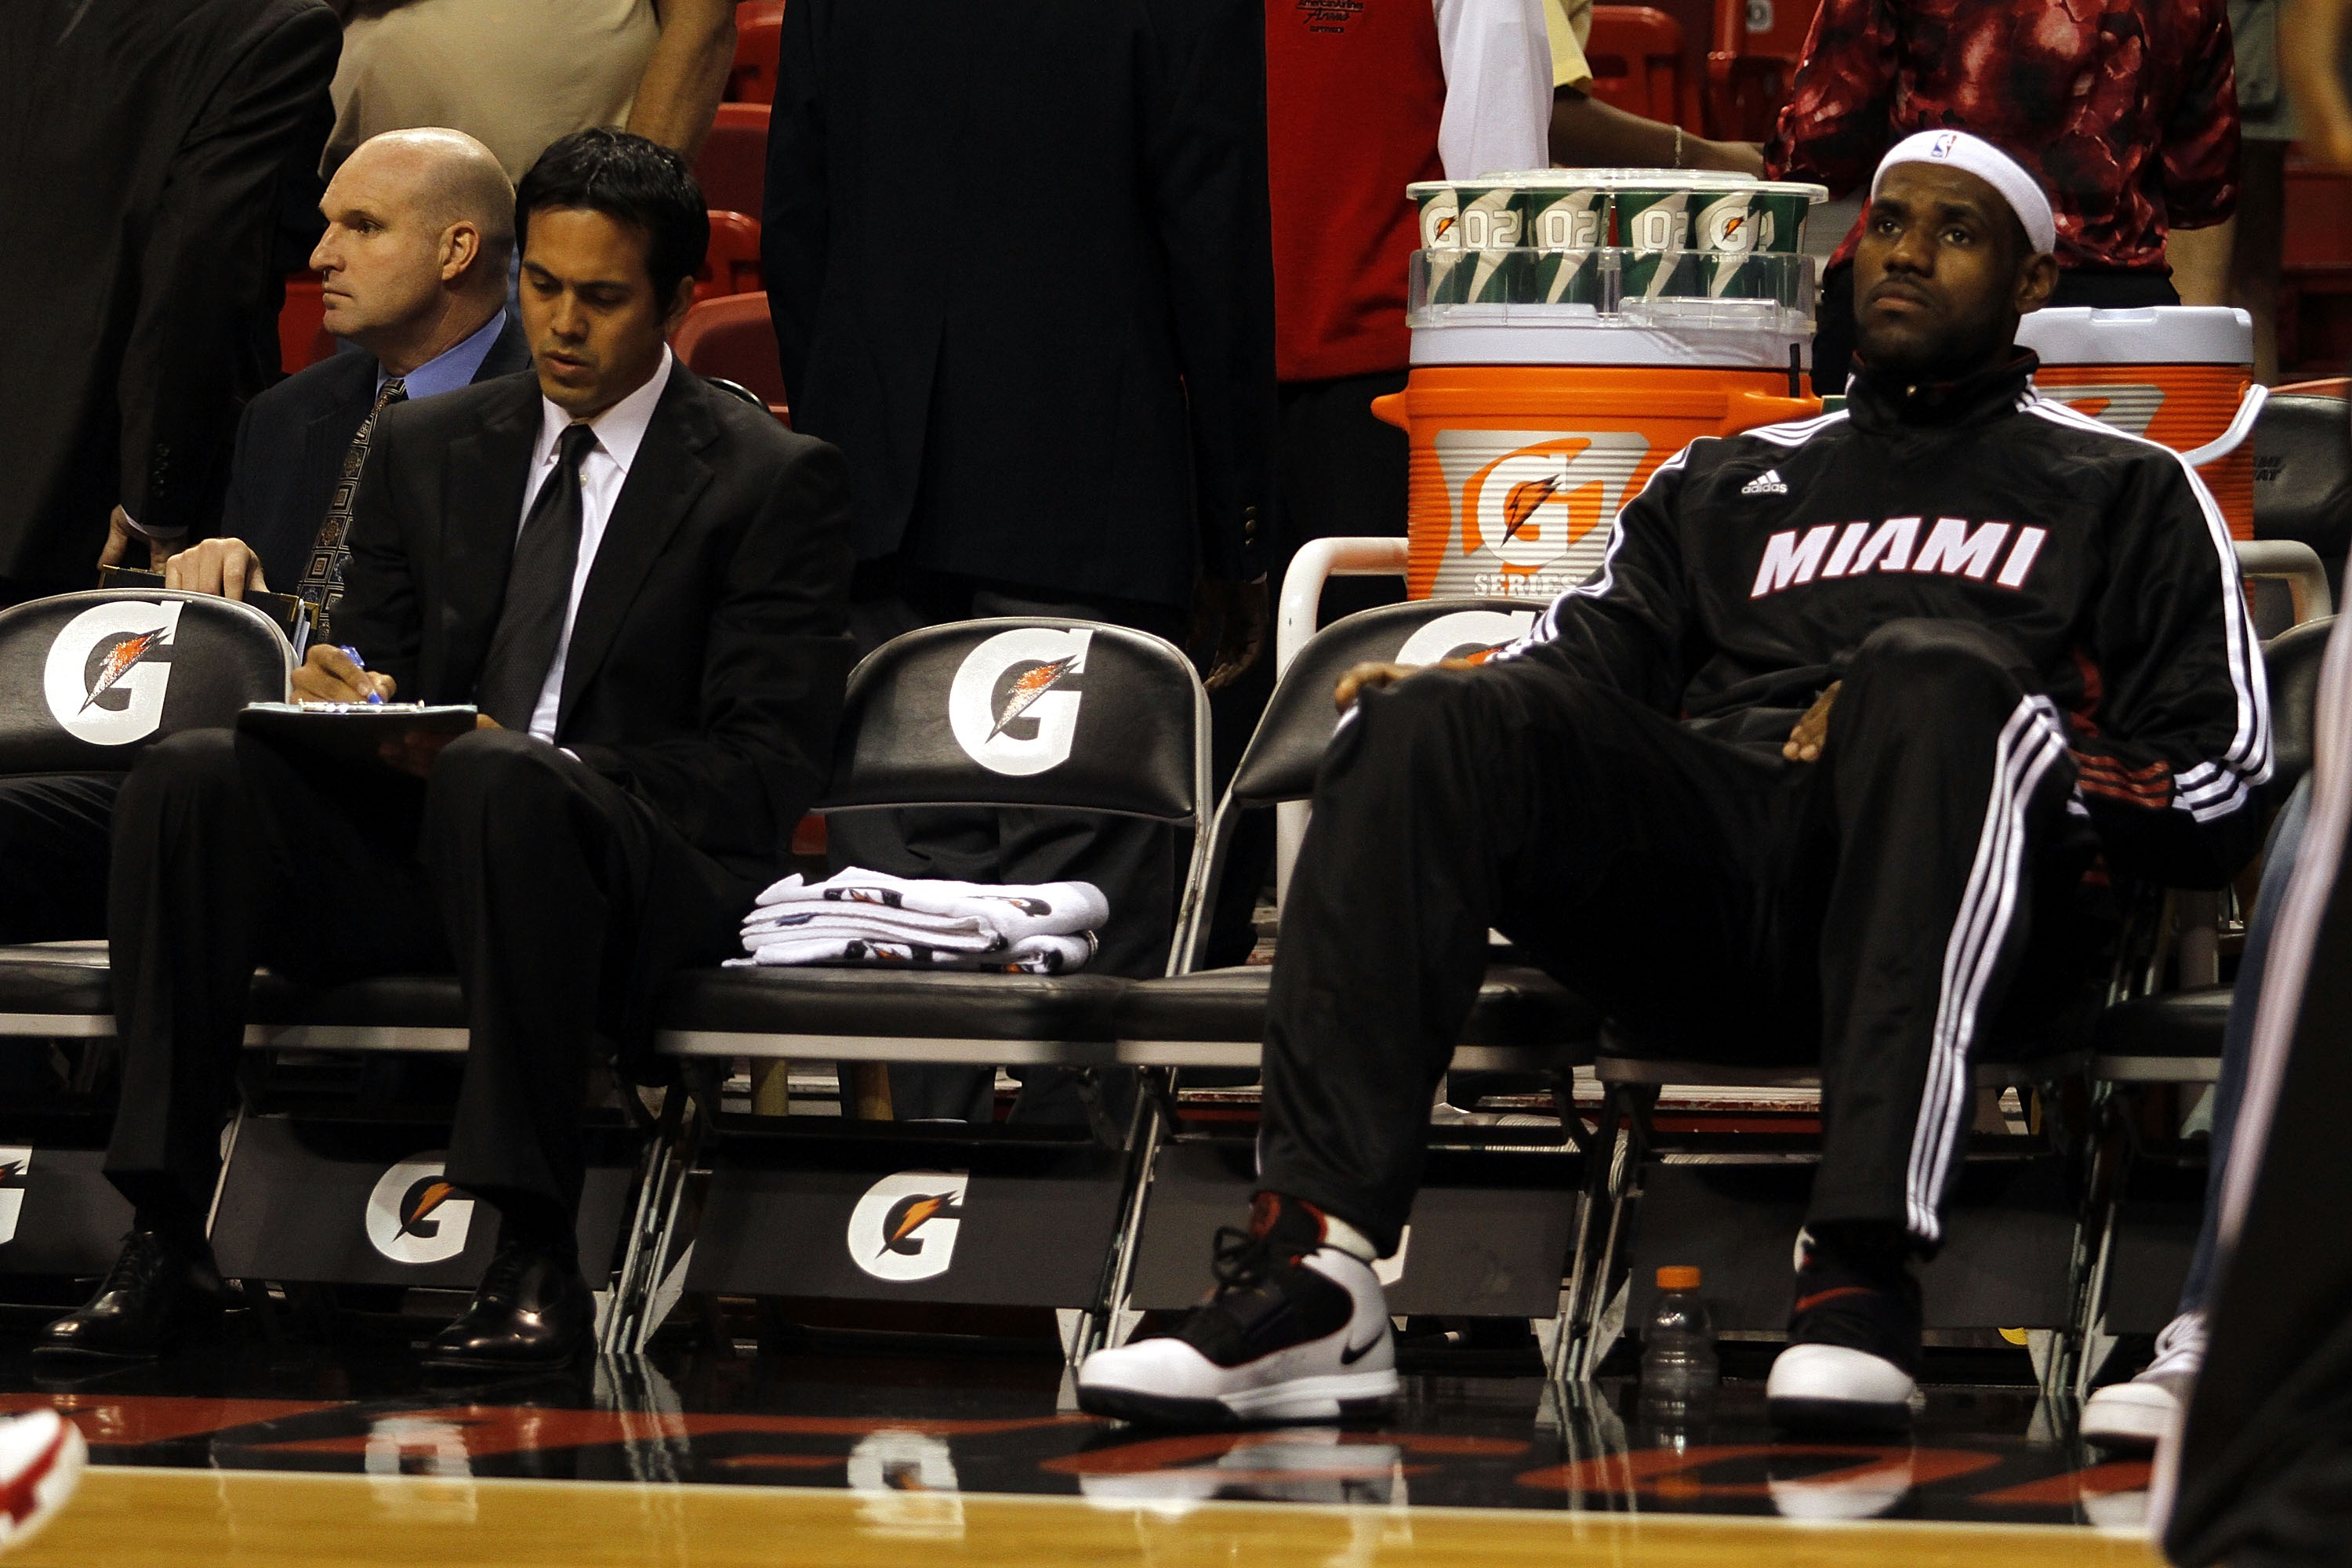 Pat Riley and Erik Spoelstra named among NBA's 15 greatest coaches